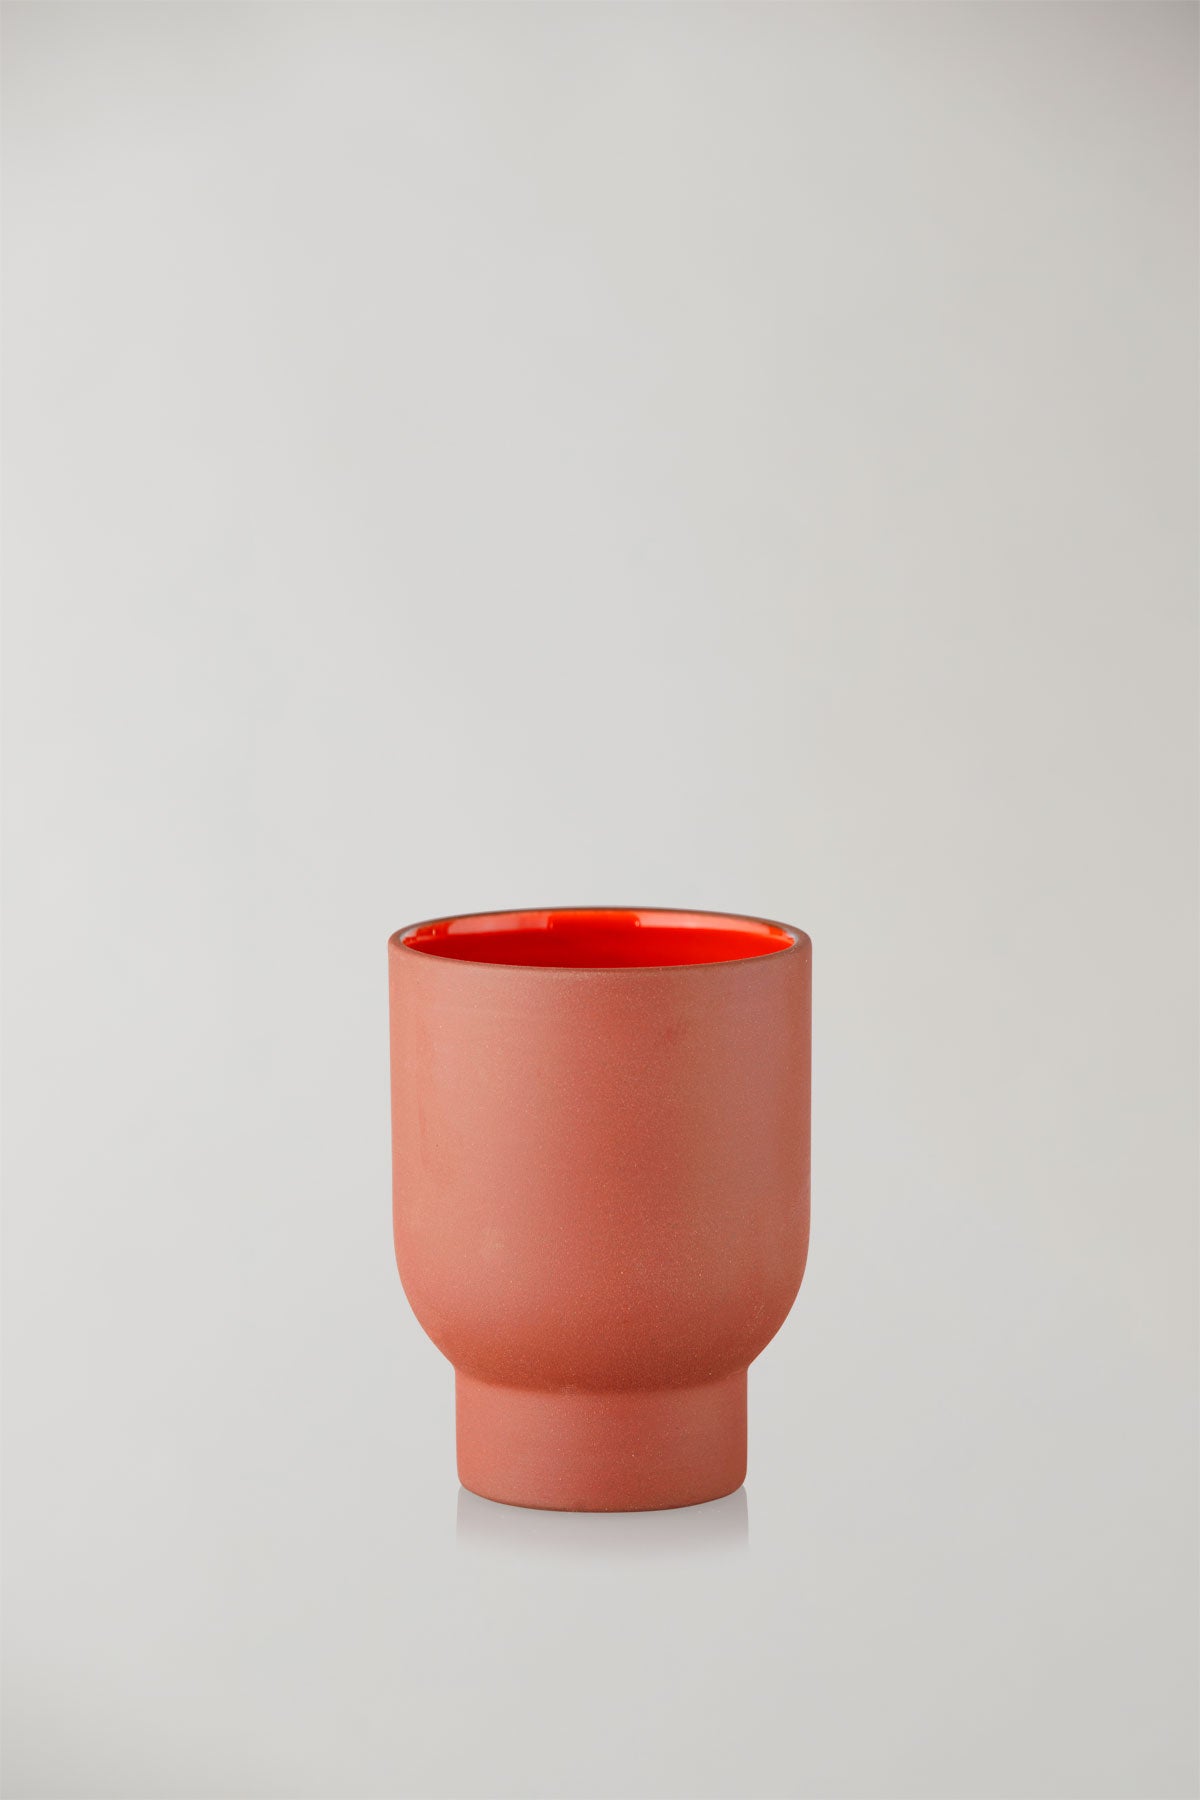 CLAYWARE, CUP, TALL, 2 PCS, TERRACOTTA/RED